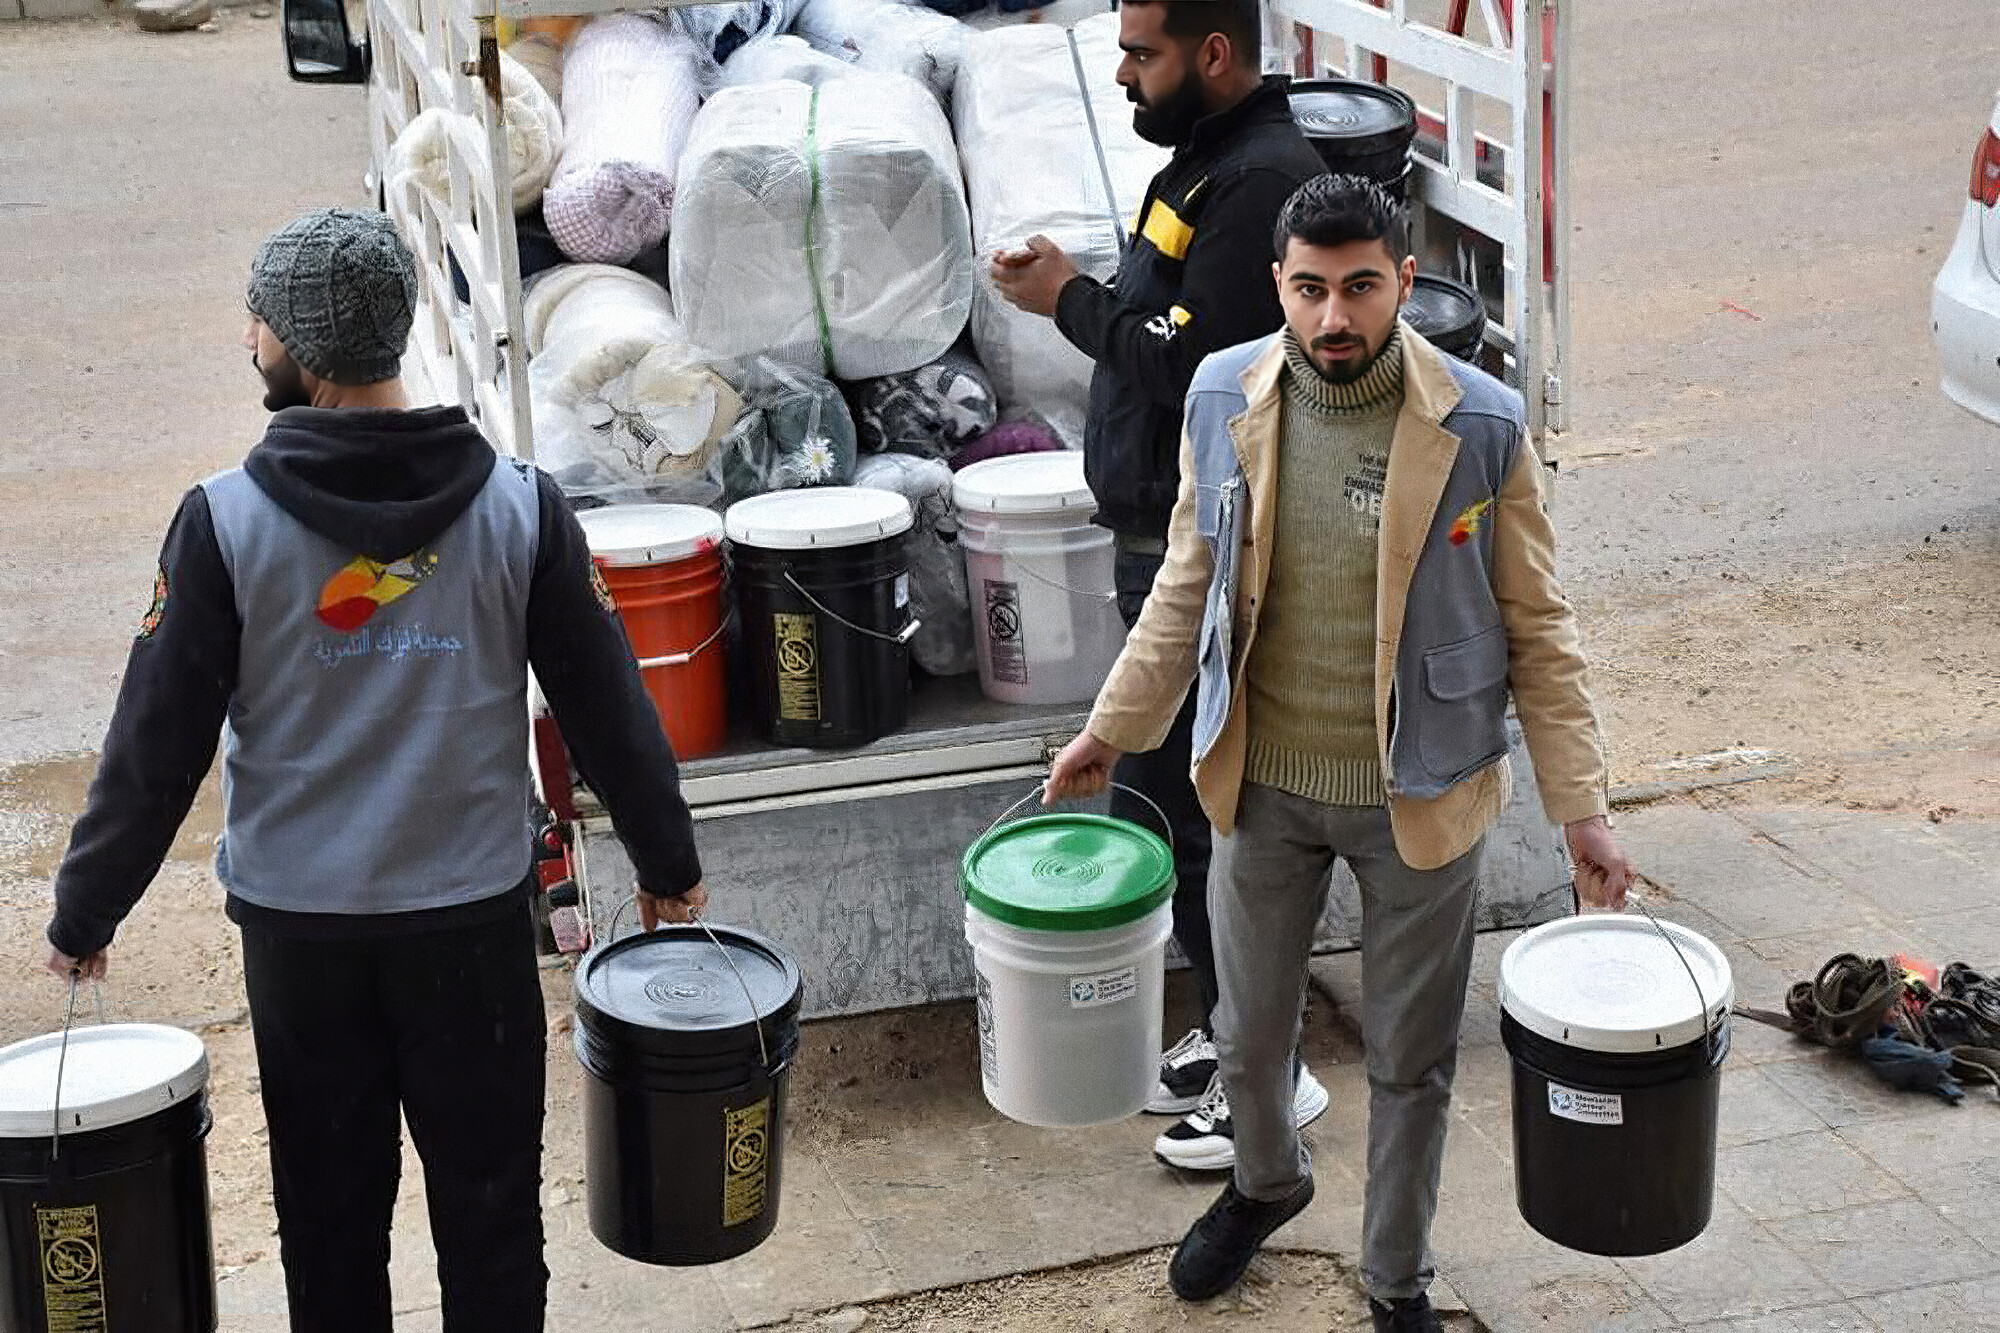 Three men unloading relief kit buckets and comforters from the back of a truck